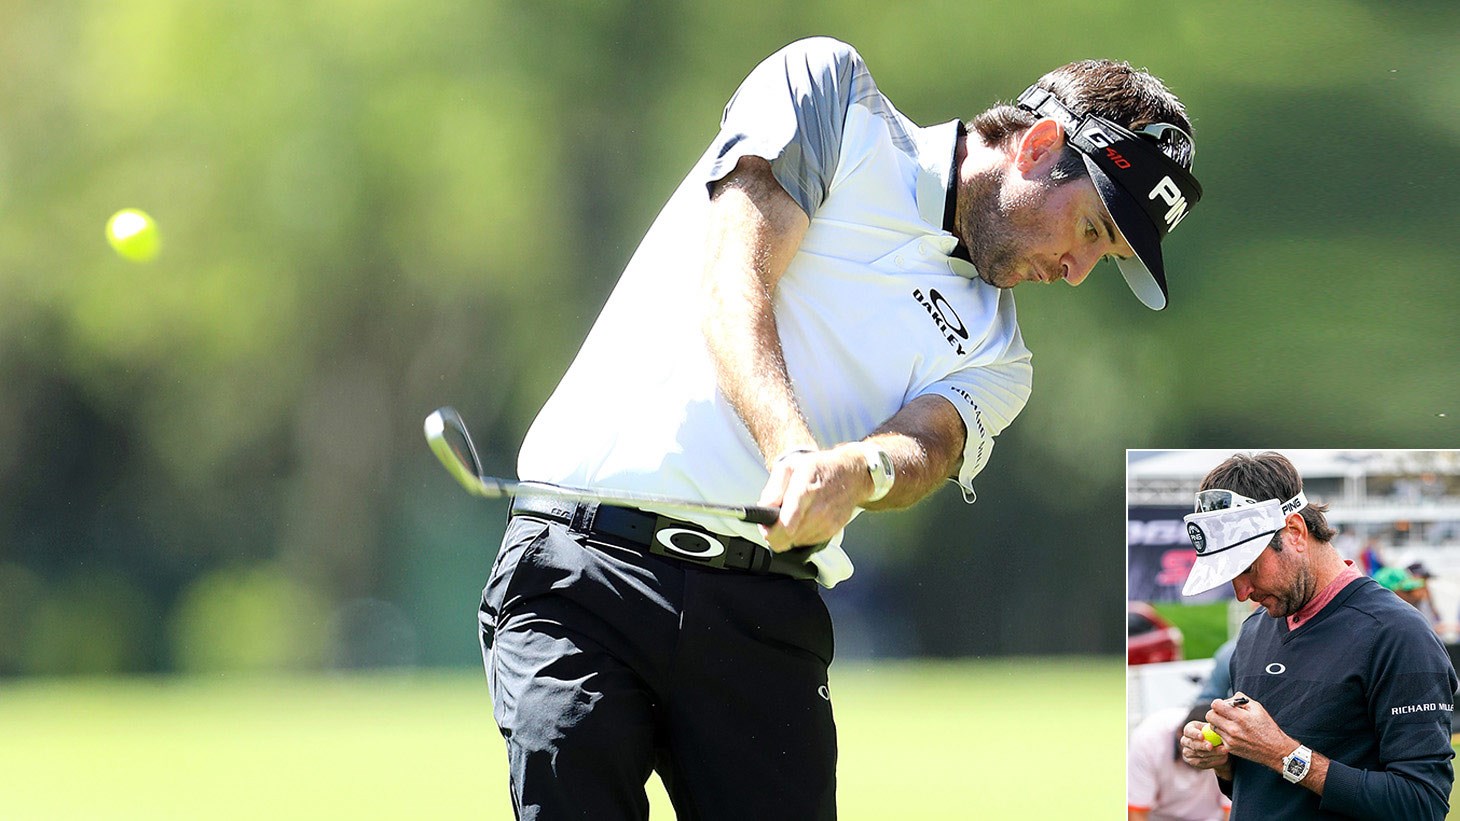 Bubba Watson in action on the PGA TOUR, using a Pro V1x Yellow golf ball